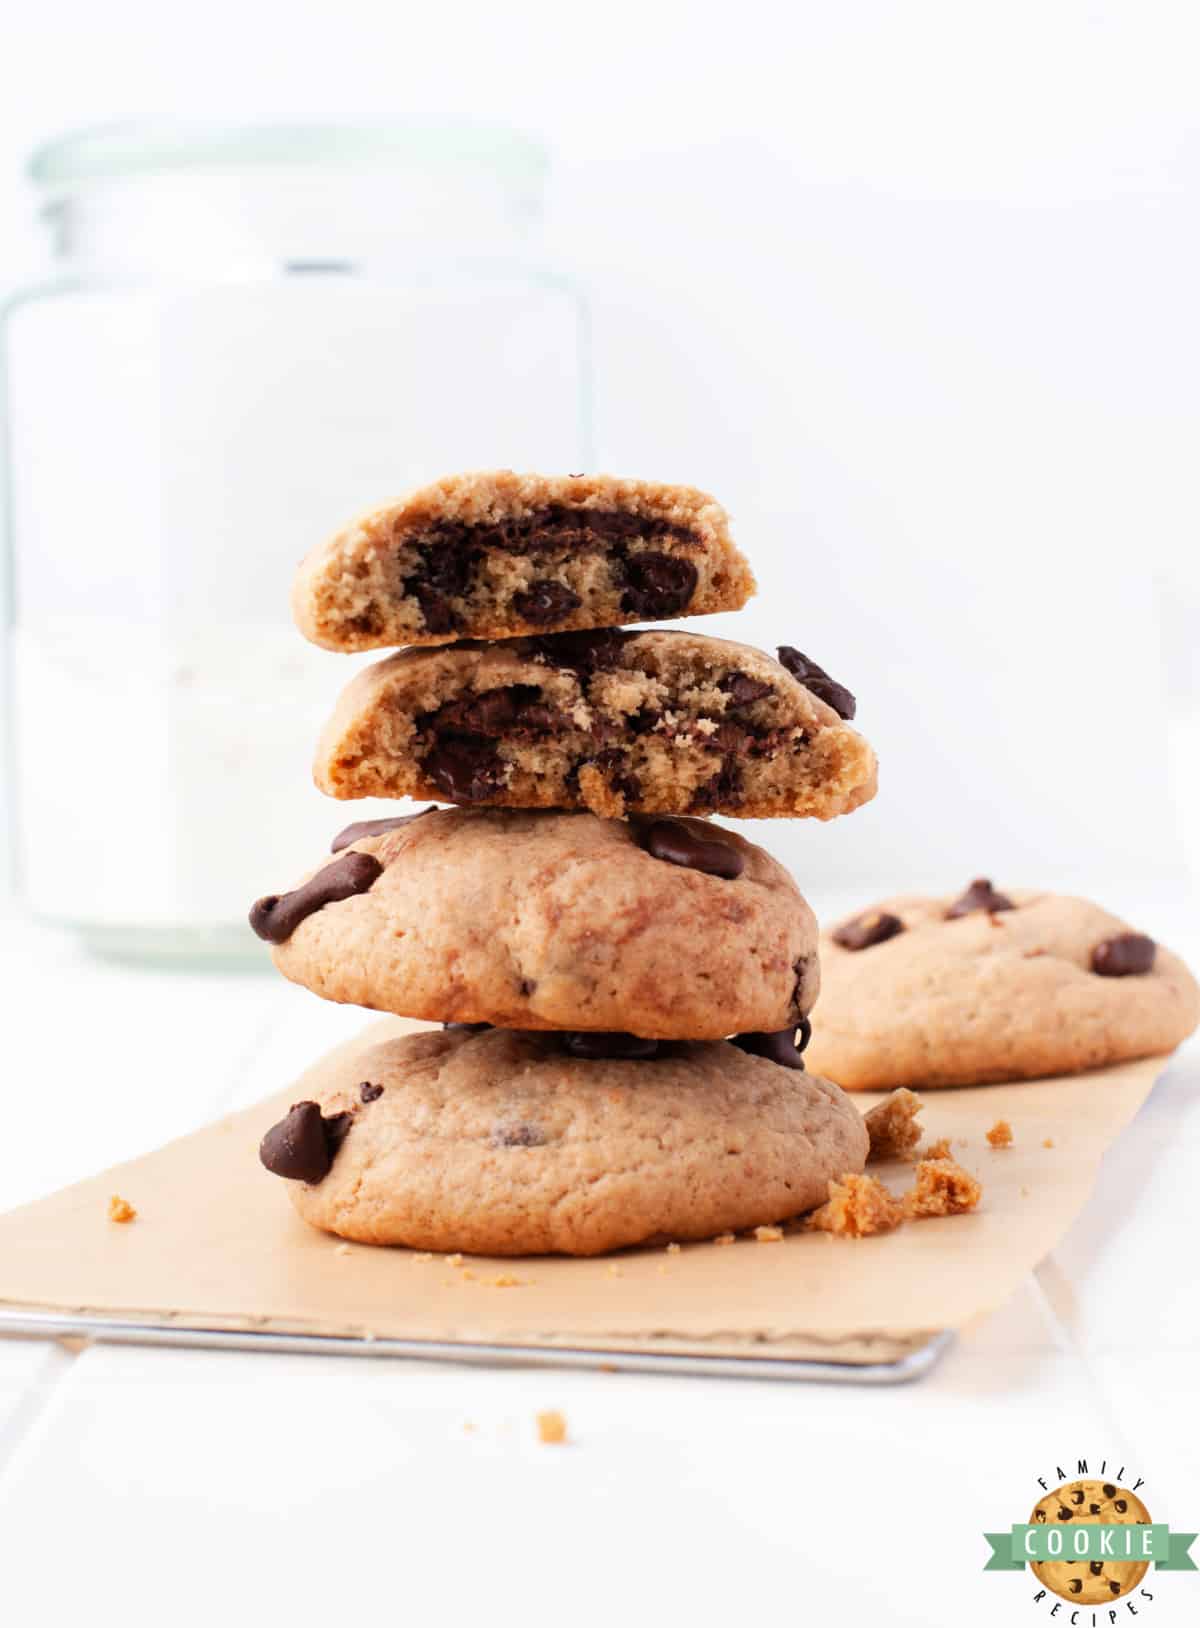 Chocolate chip cookie recipe with Nutella in the middle